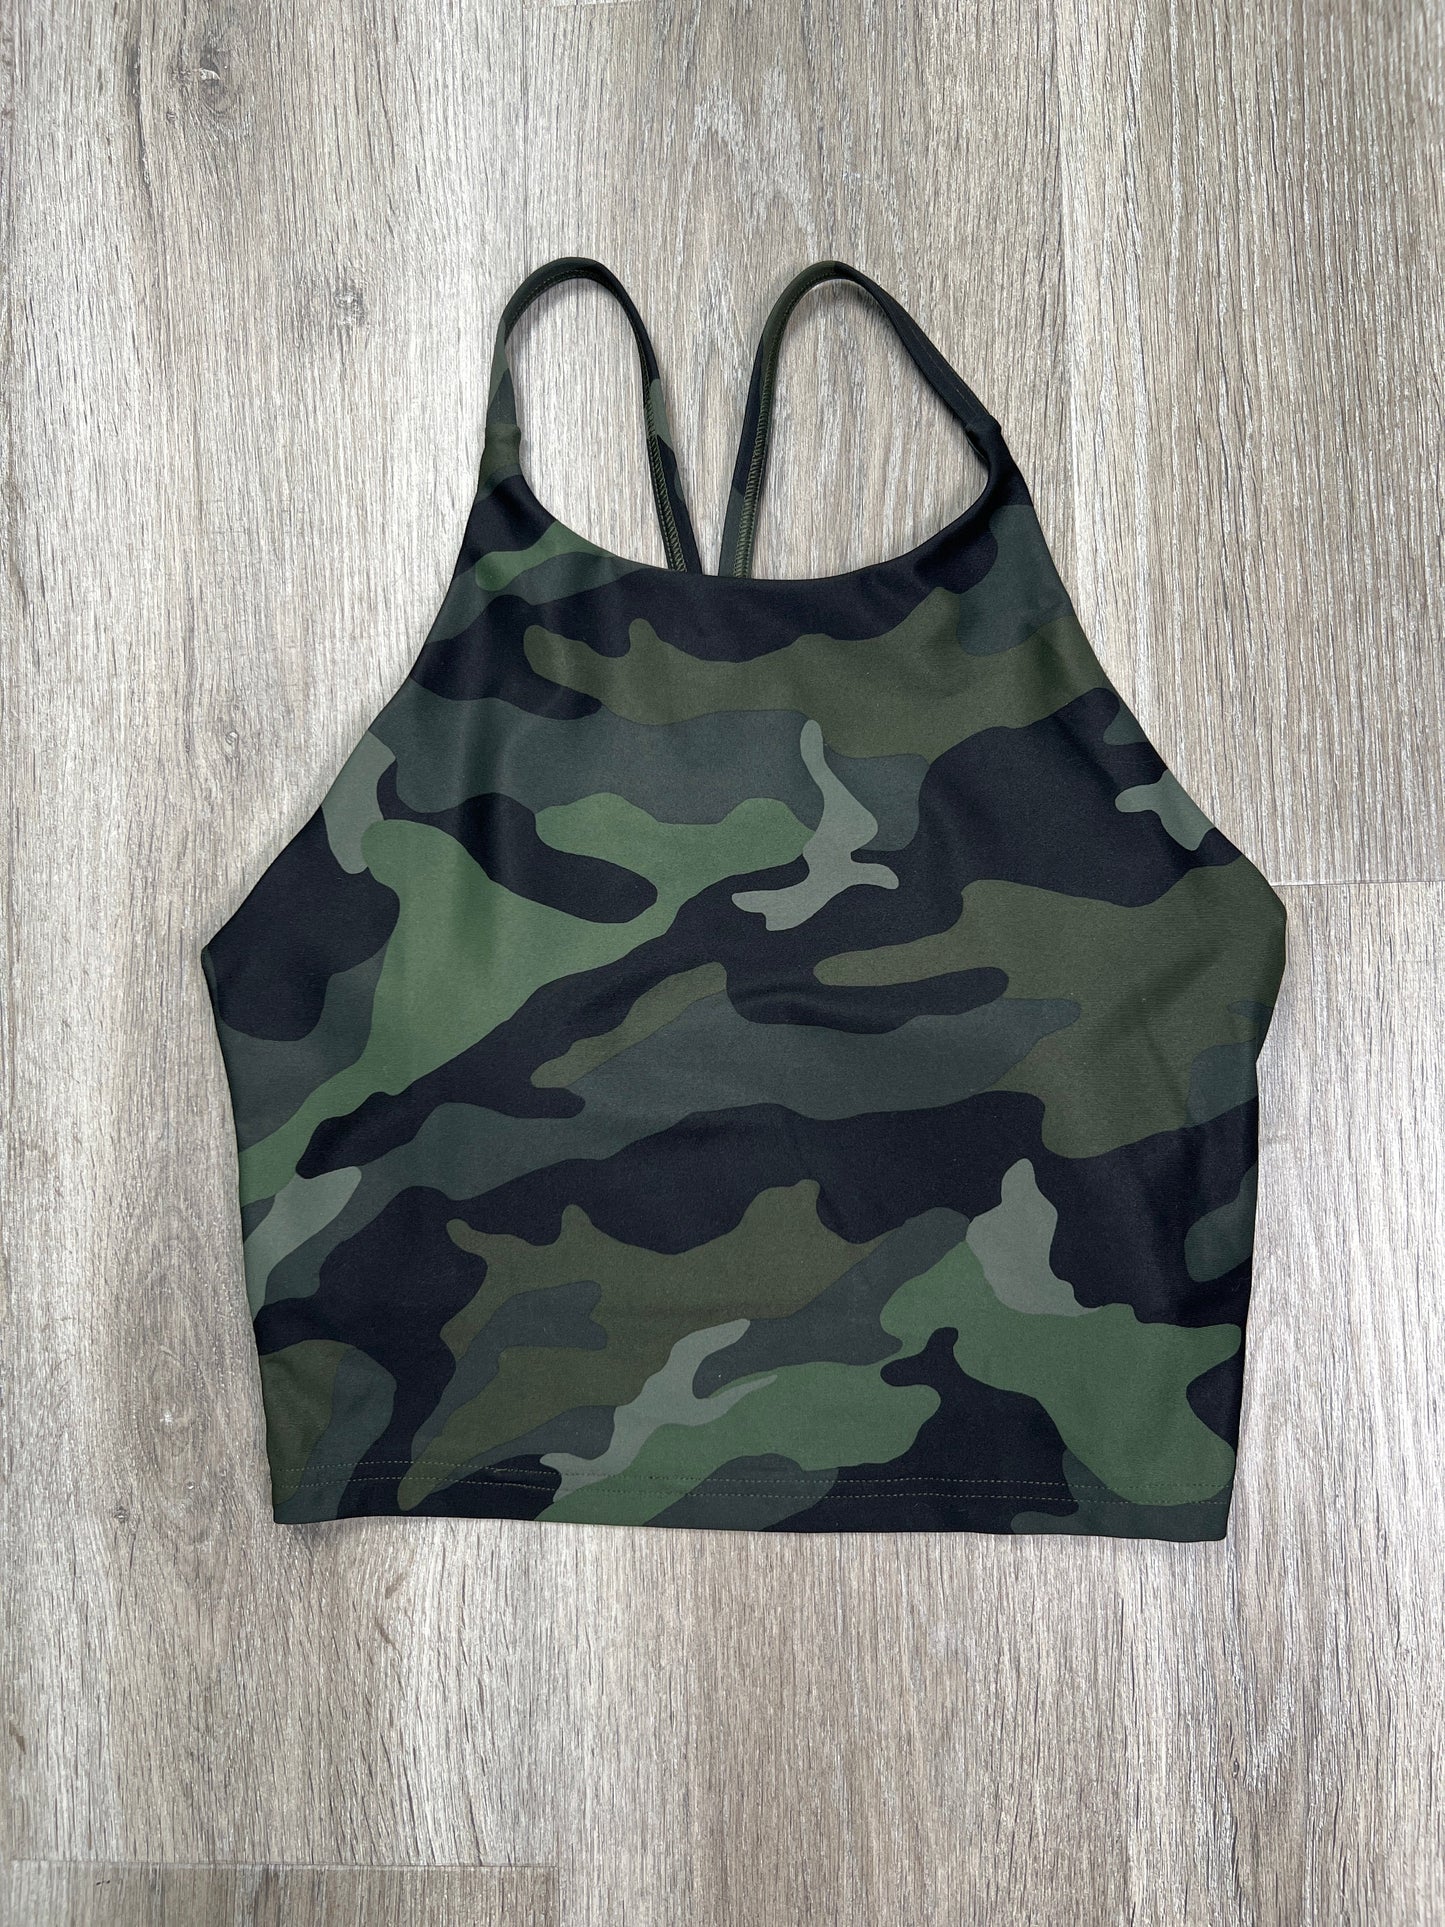 Camouflage Print Athletic Bra Old Navy, Size S